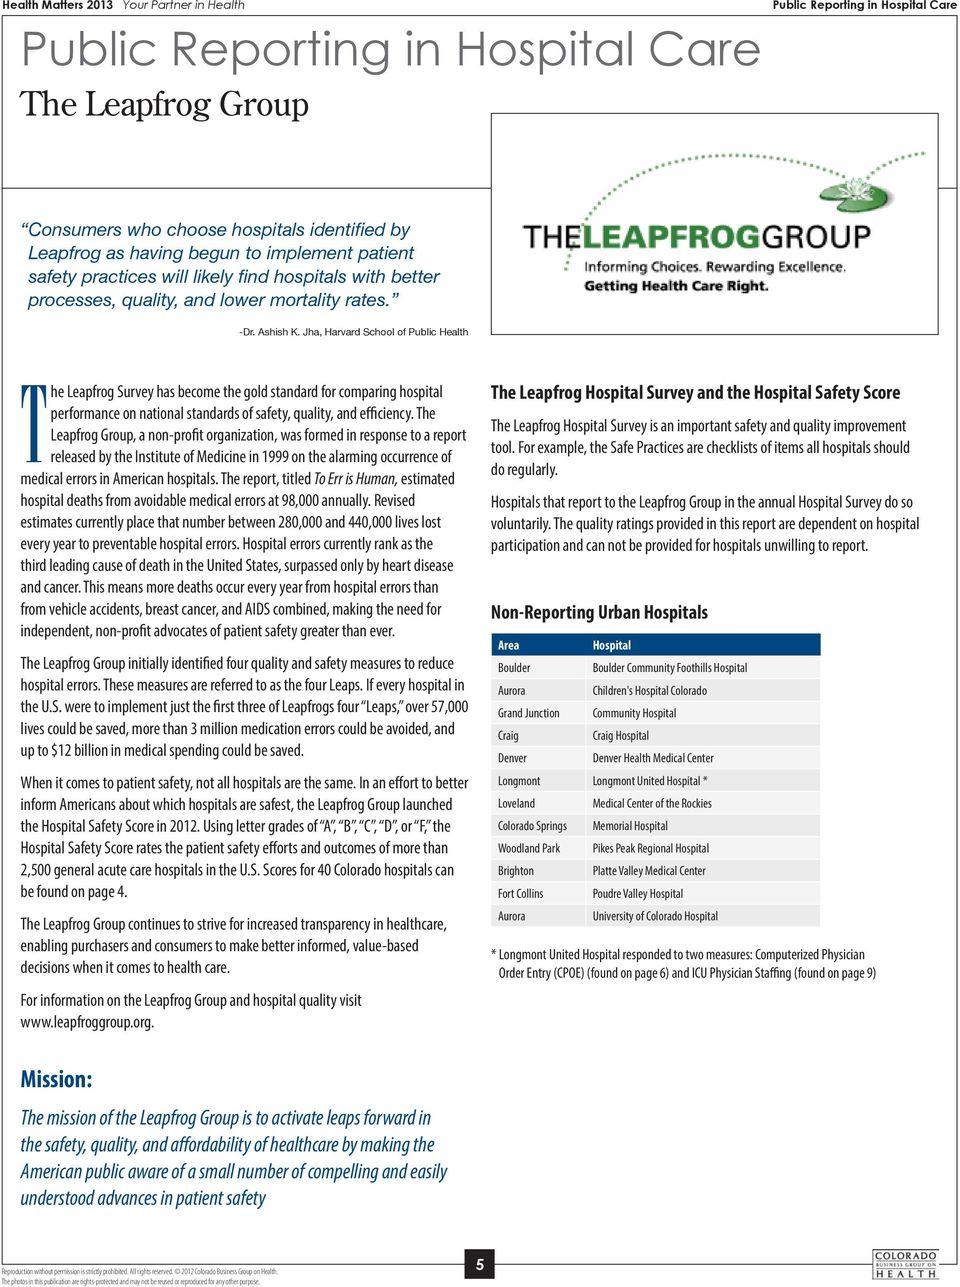 Jha, Harvard School of Public Health The Leapfrog Survey has become the gold standard for comparing hospital performance on national standards of safety, quality, and efficiency.